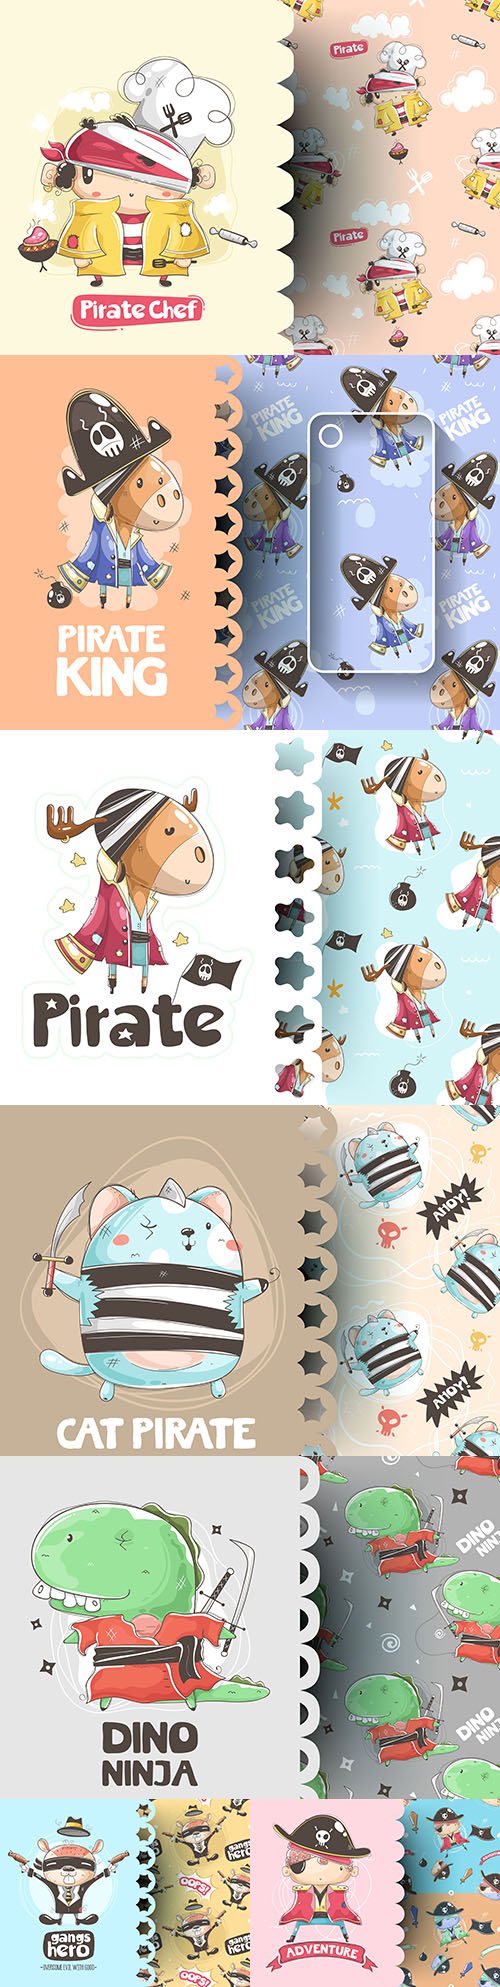 Cute characters in pirate suit design t-shirt